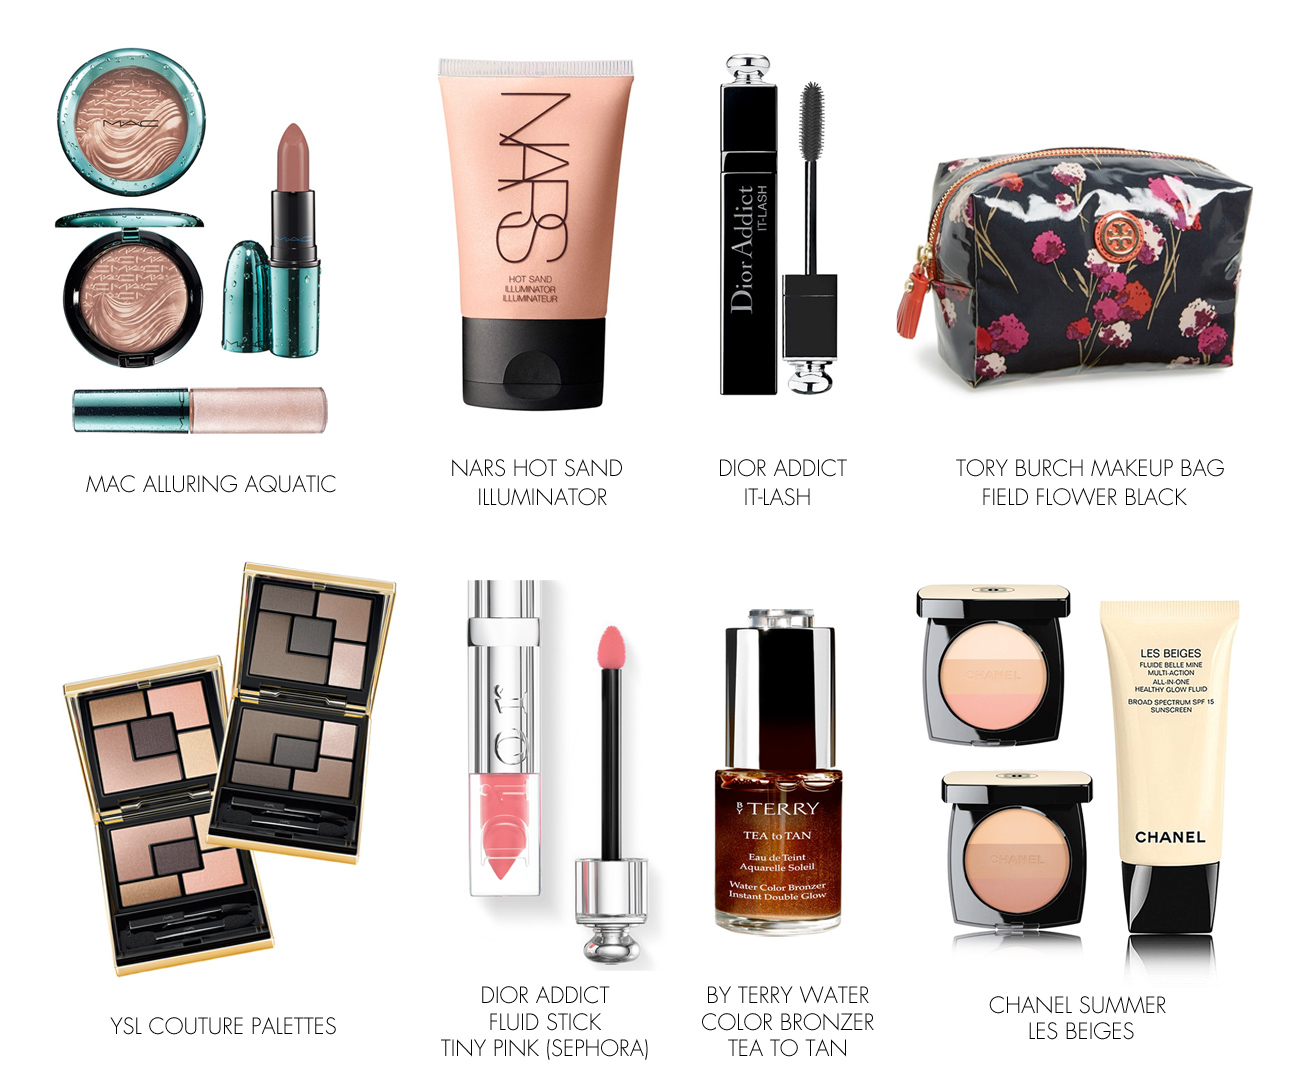 CHANEL · N°5 Holiday 2021 Makeup Collection